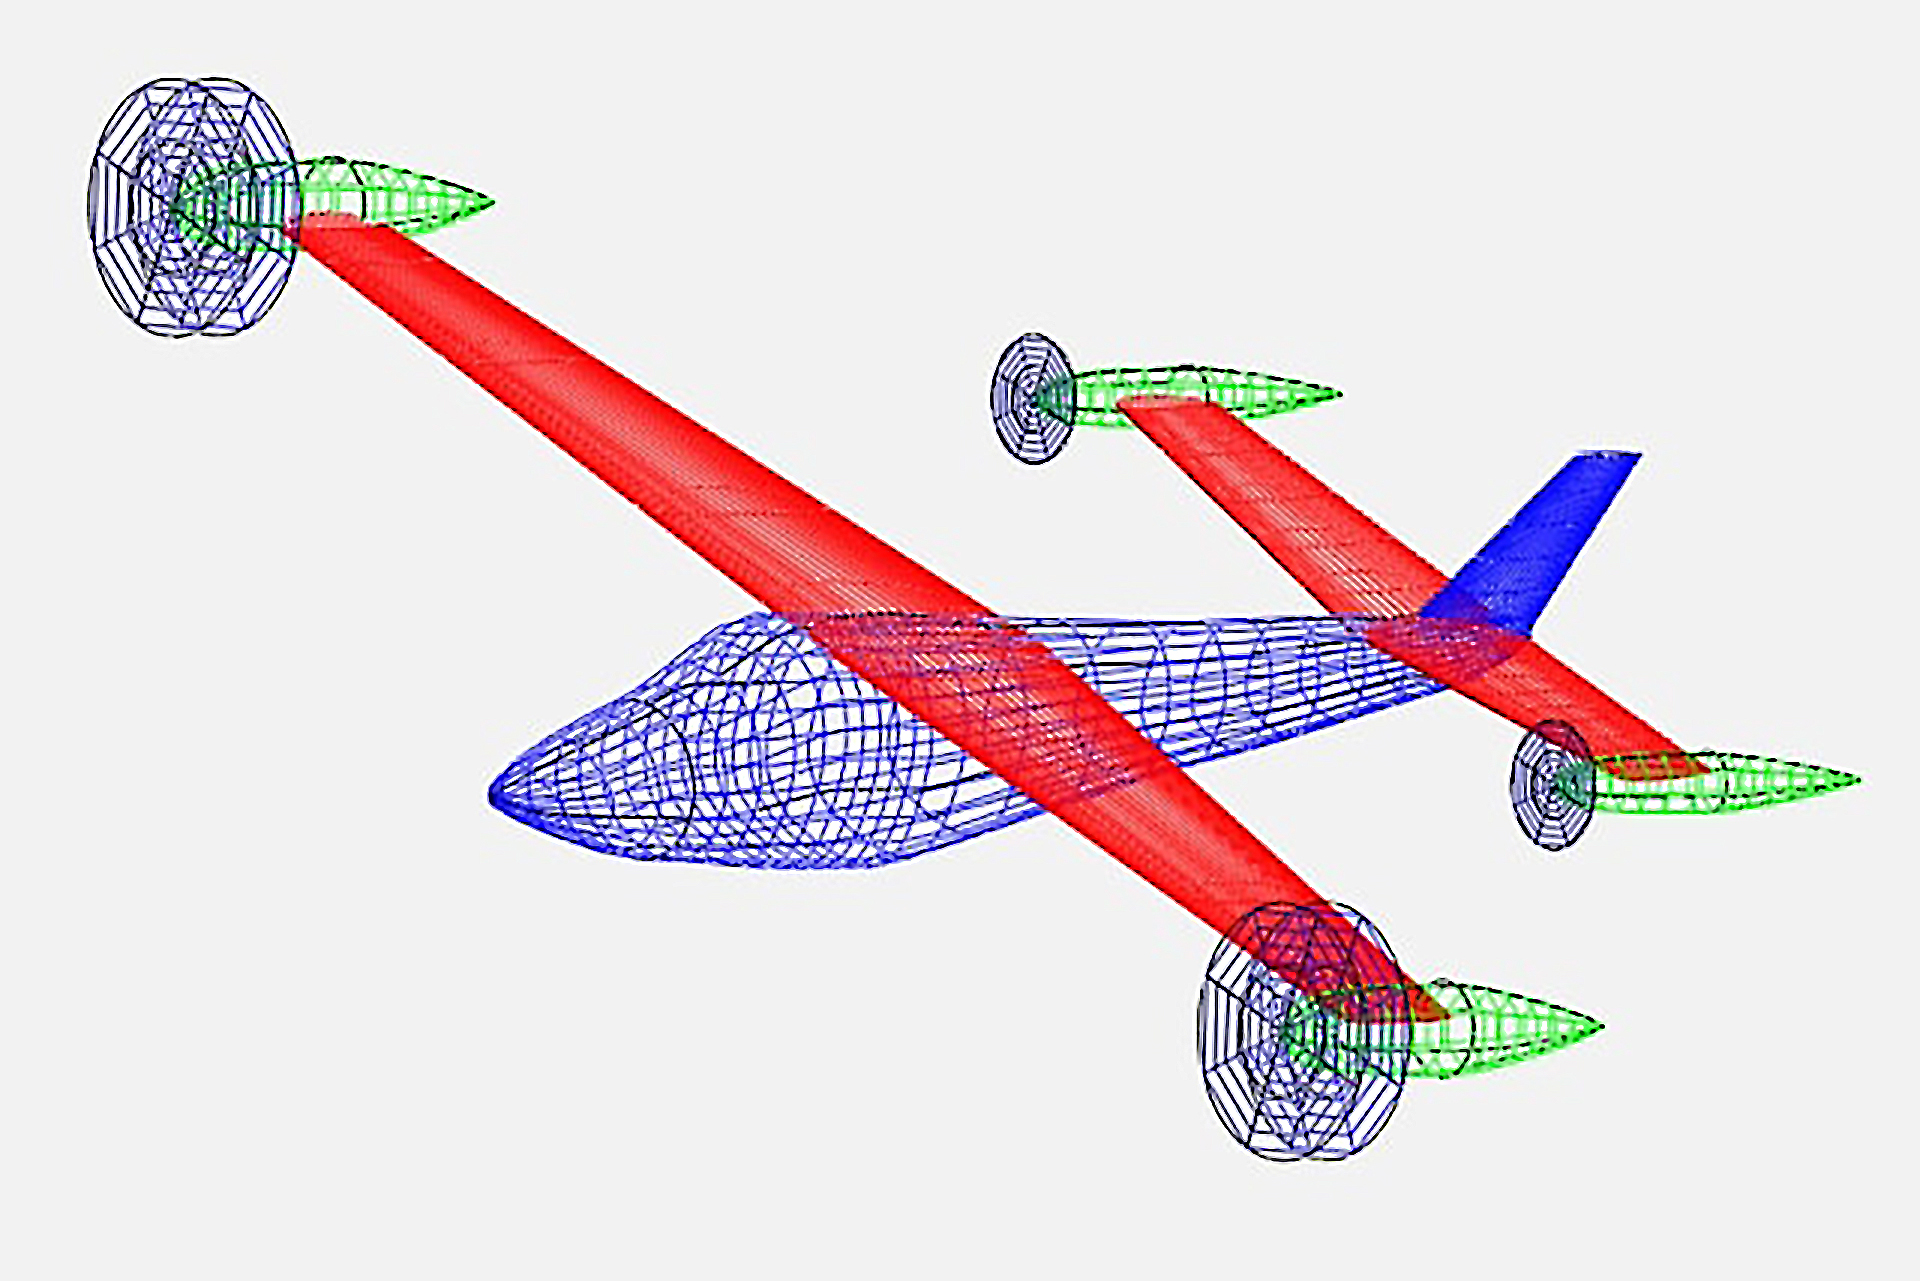 Computer generated graphic of the Xiphos aircraft.